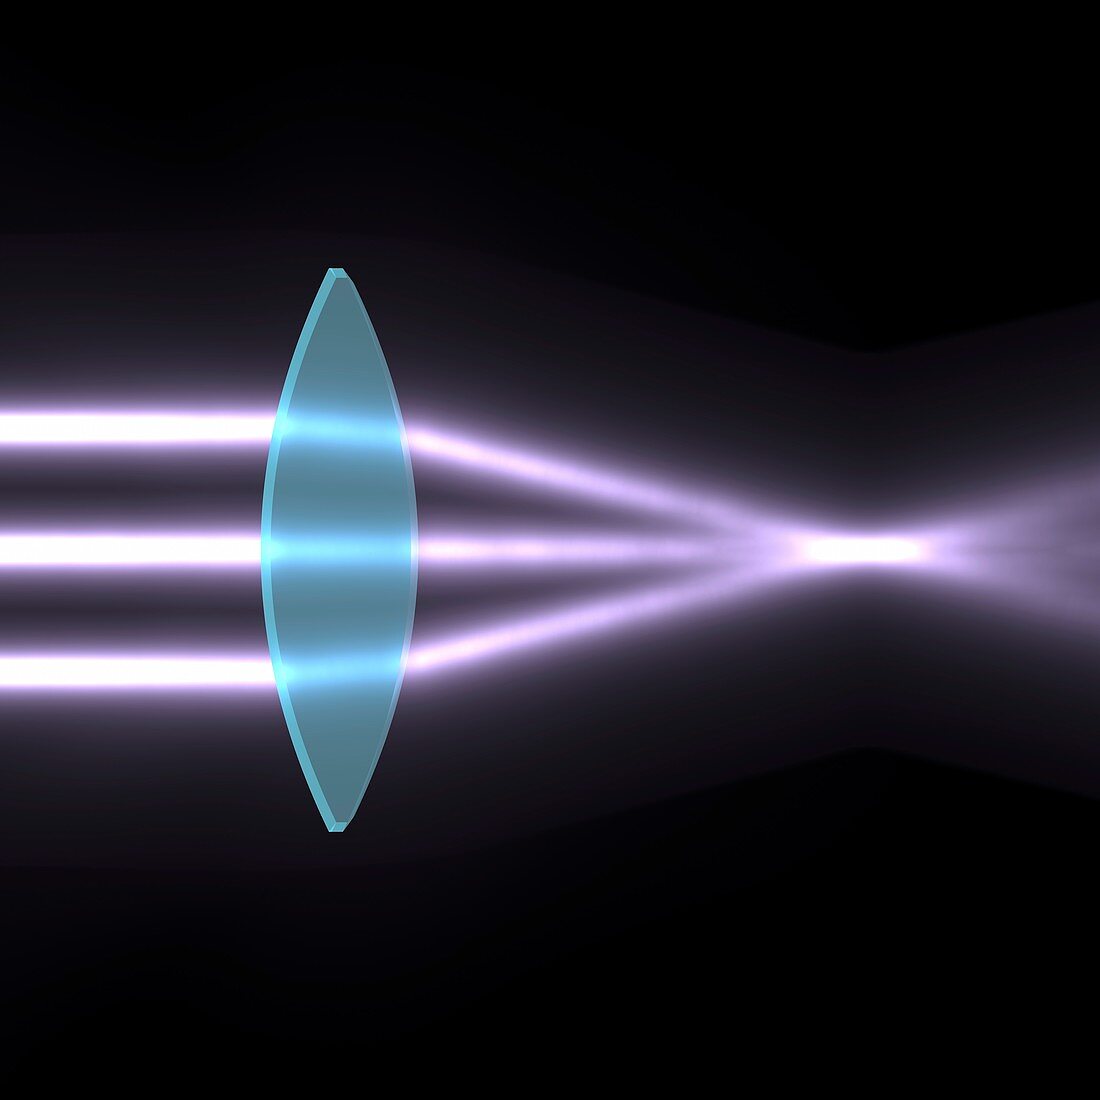 Light refraction with biconvex lens